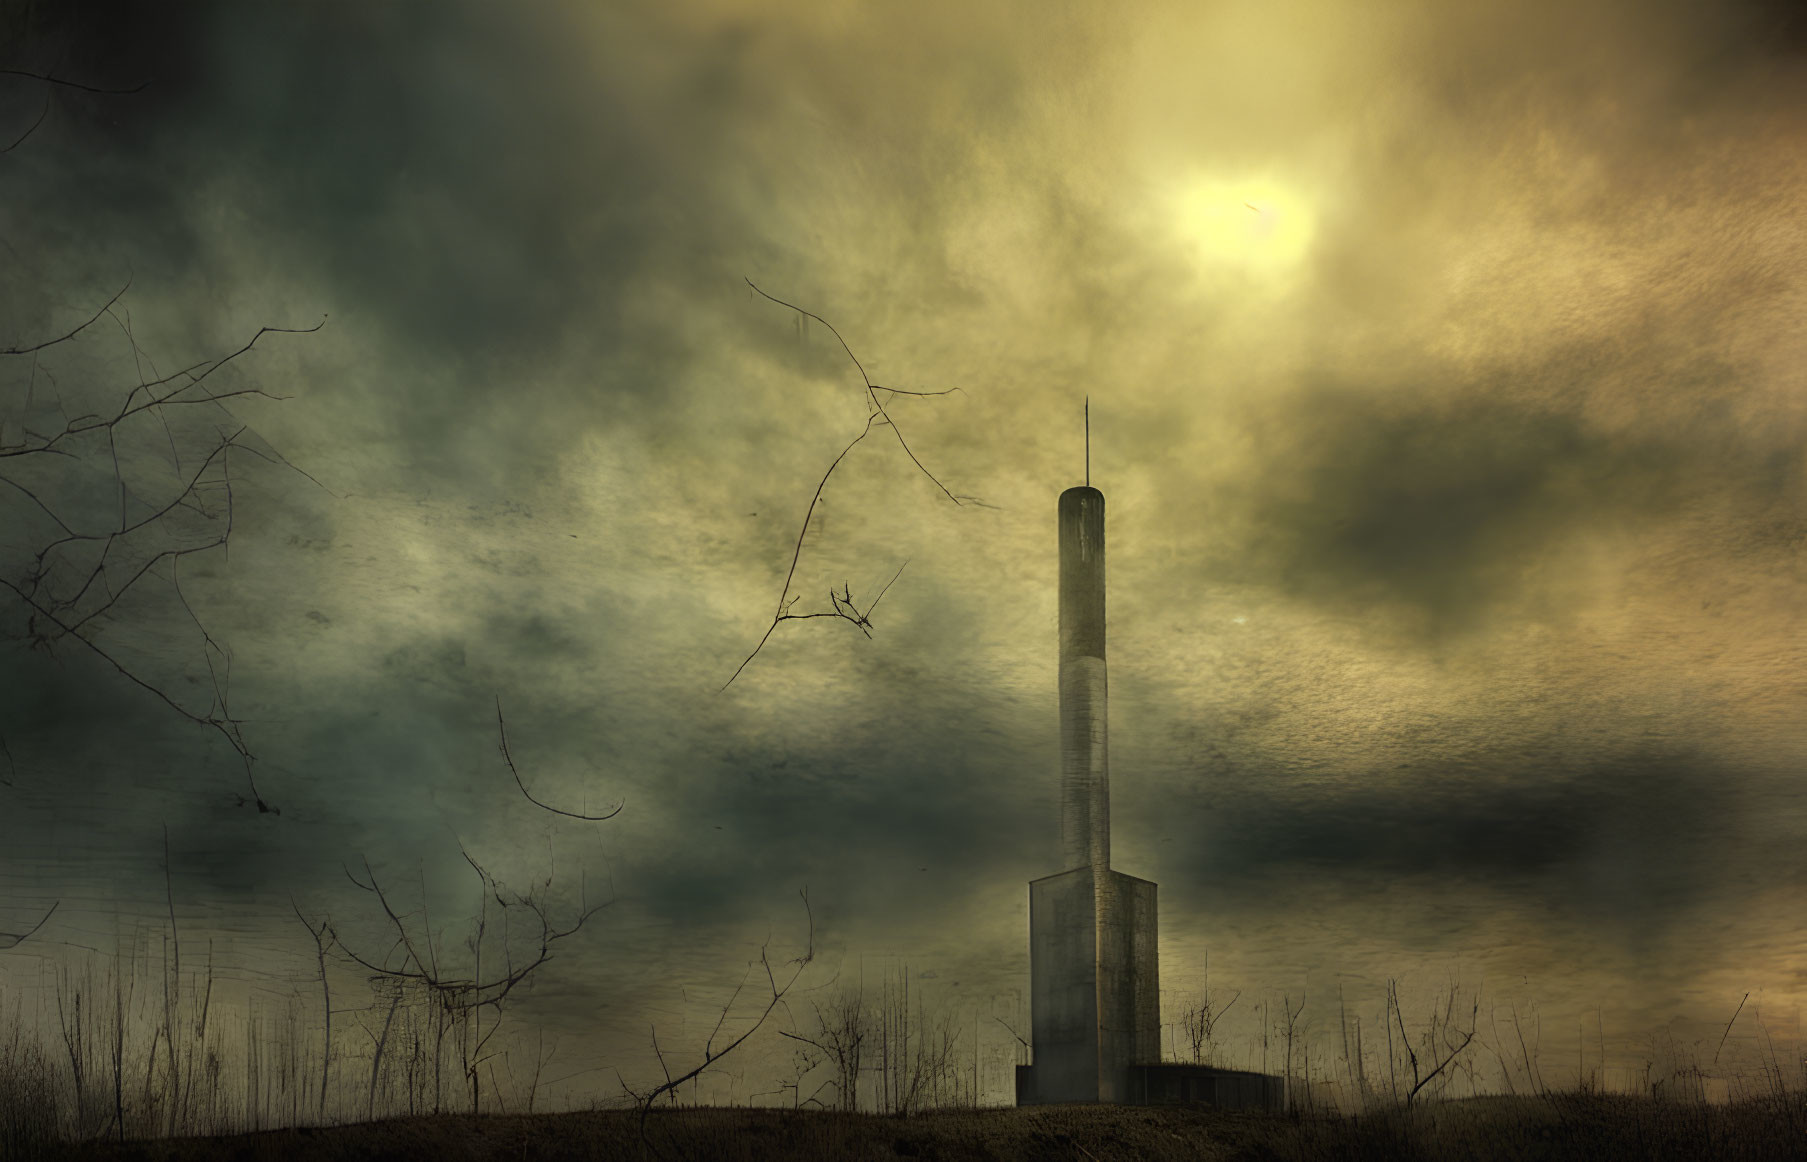 Barren landscape with tall chimney and dramatic sky.